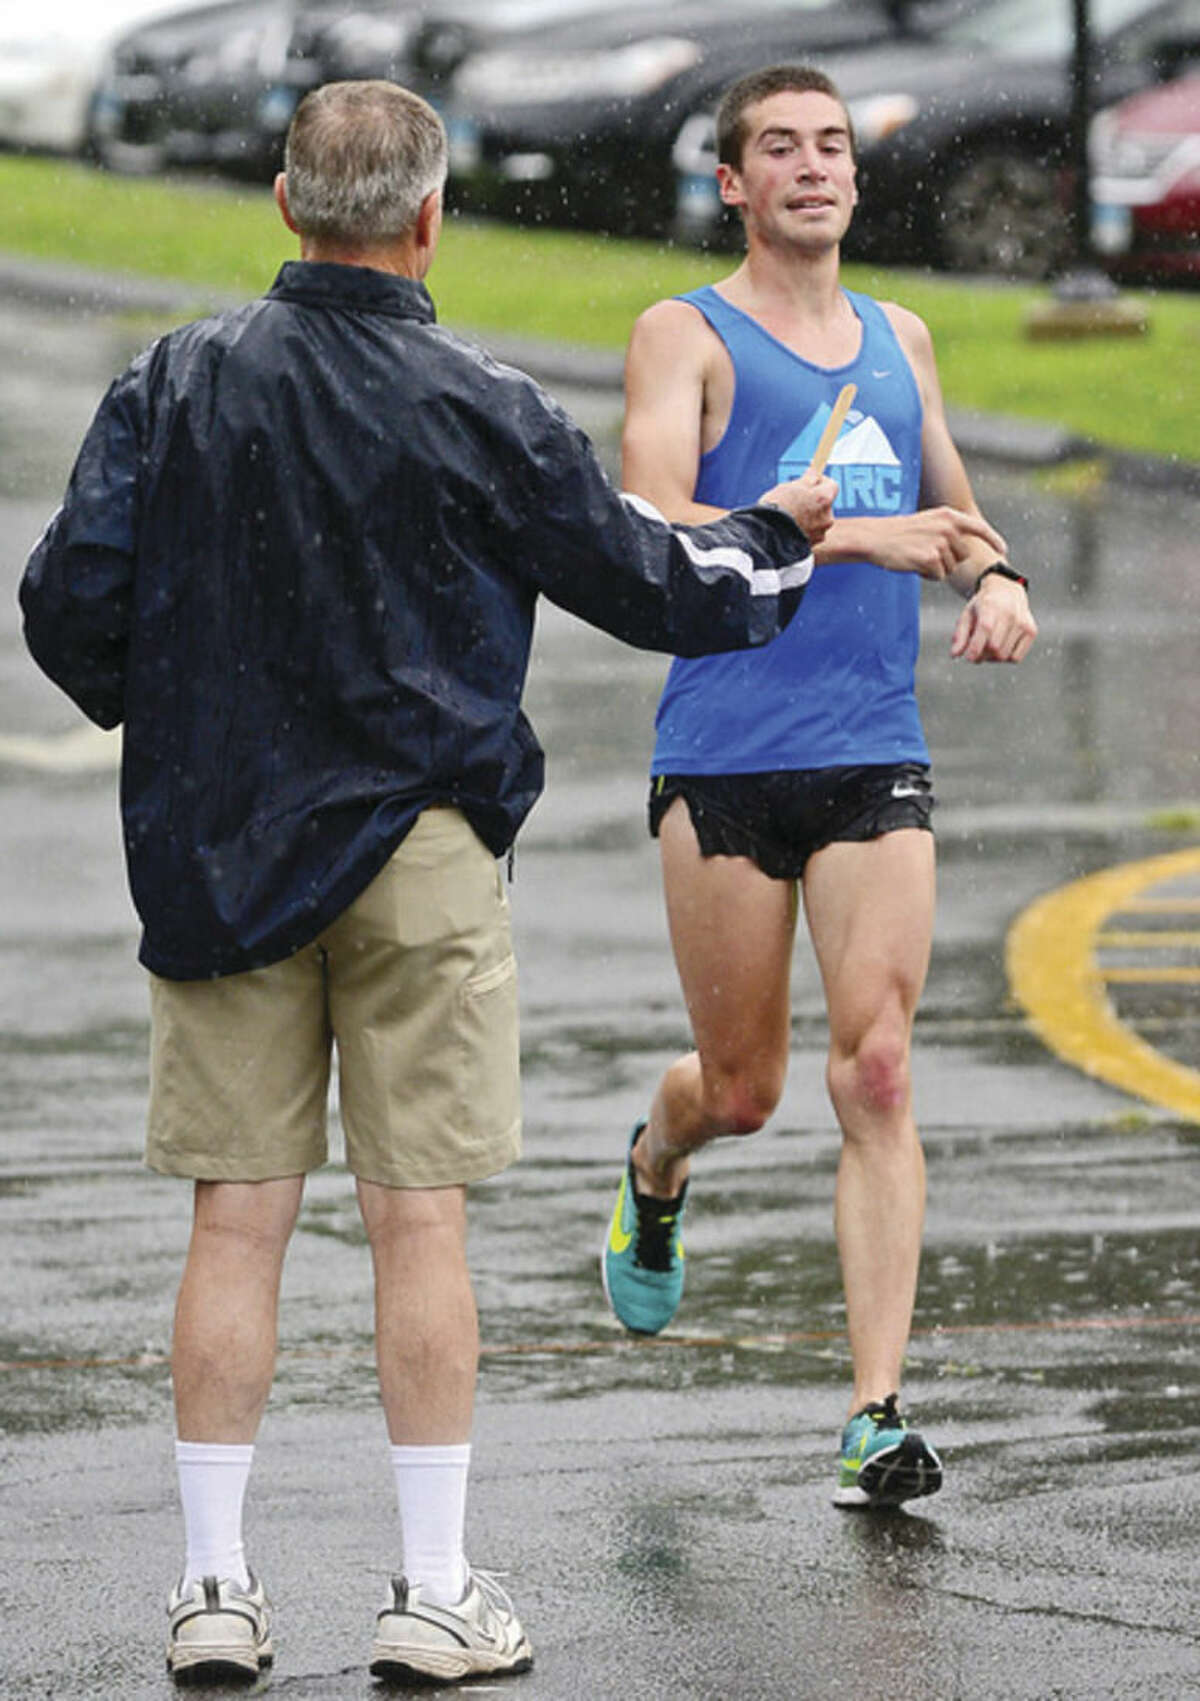 Hour photo / Erik Trautmann Kevin Hoyt finishes first as runners compete in the Westport Roadrunners Summer Series at Longshore Park in Westport Saturday.